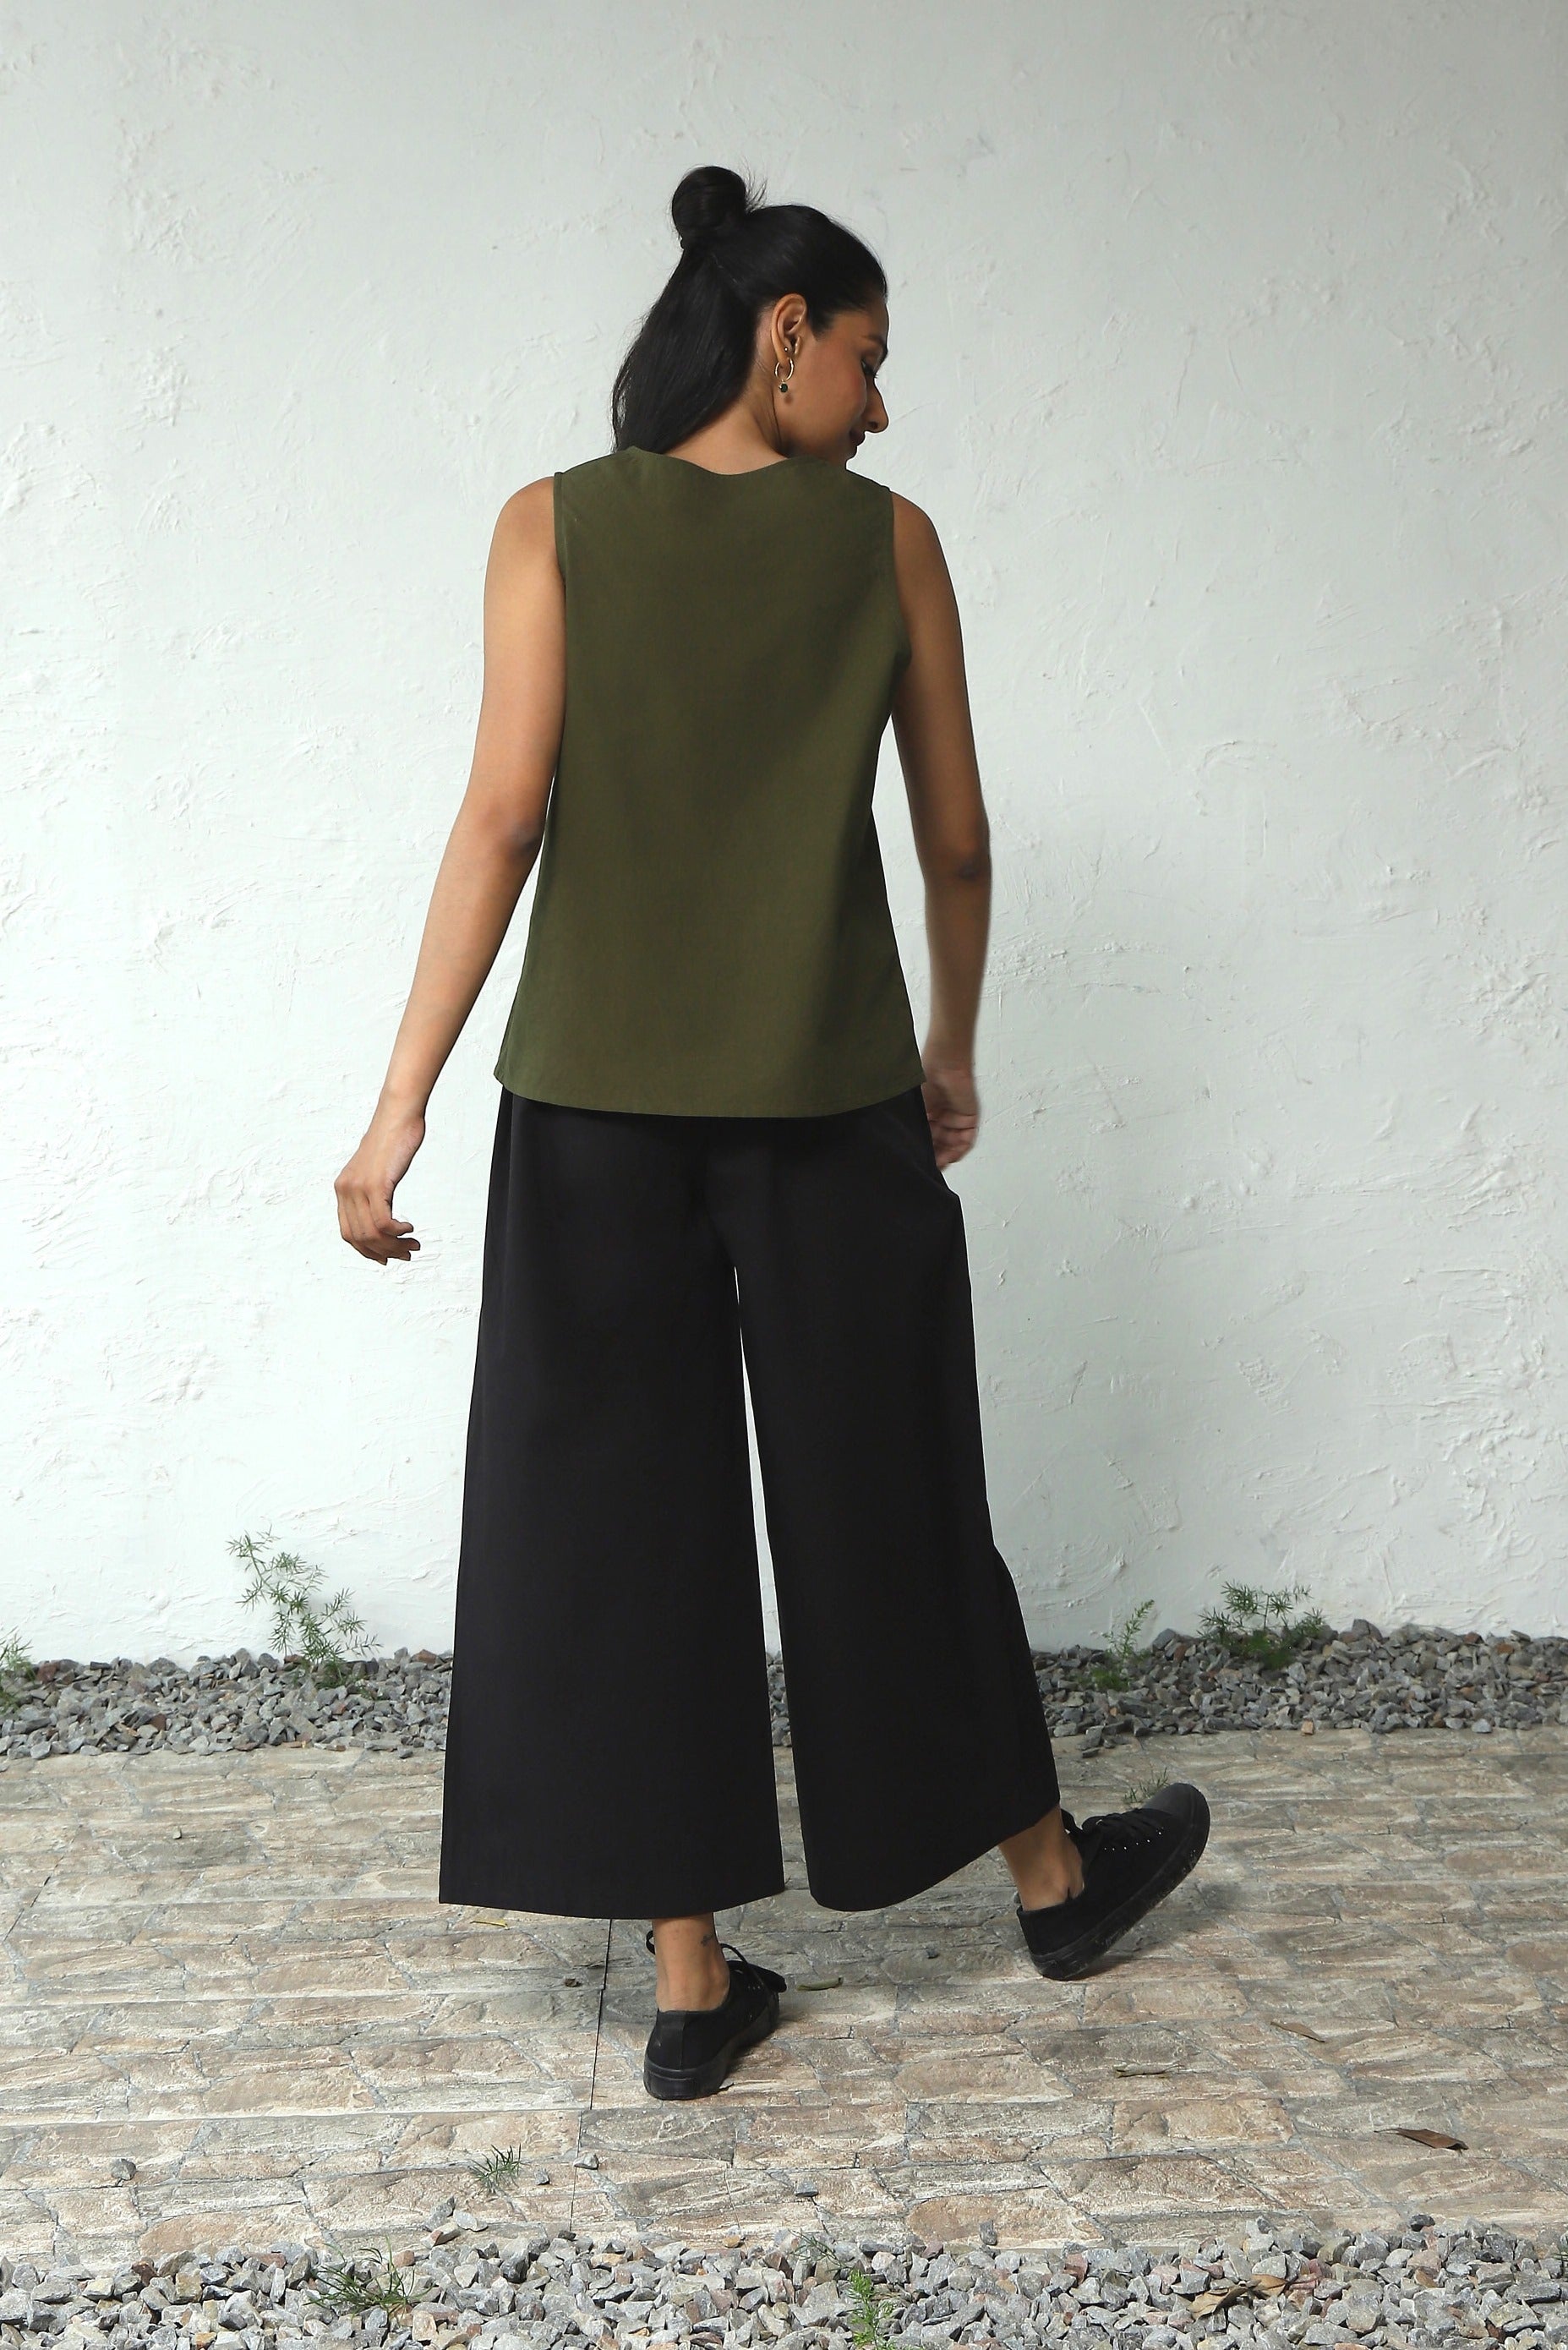 Green Cotton Poplin Sleeveless Top With Black Bottom Co-Ord Set at Kamakhyaa by Canoopi. This item is Black, Canoopi, Casual Wear, Complete Sets, Green, Natural, Poplin, Regular Fit, Solids, Vacation Co-ords, Womenswear